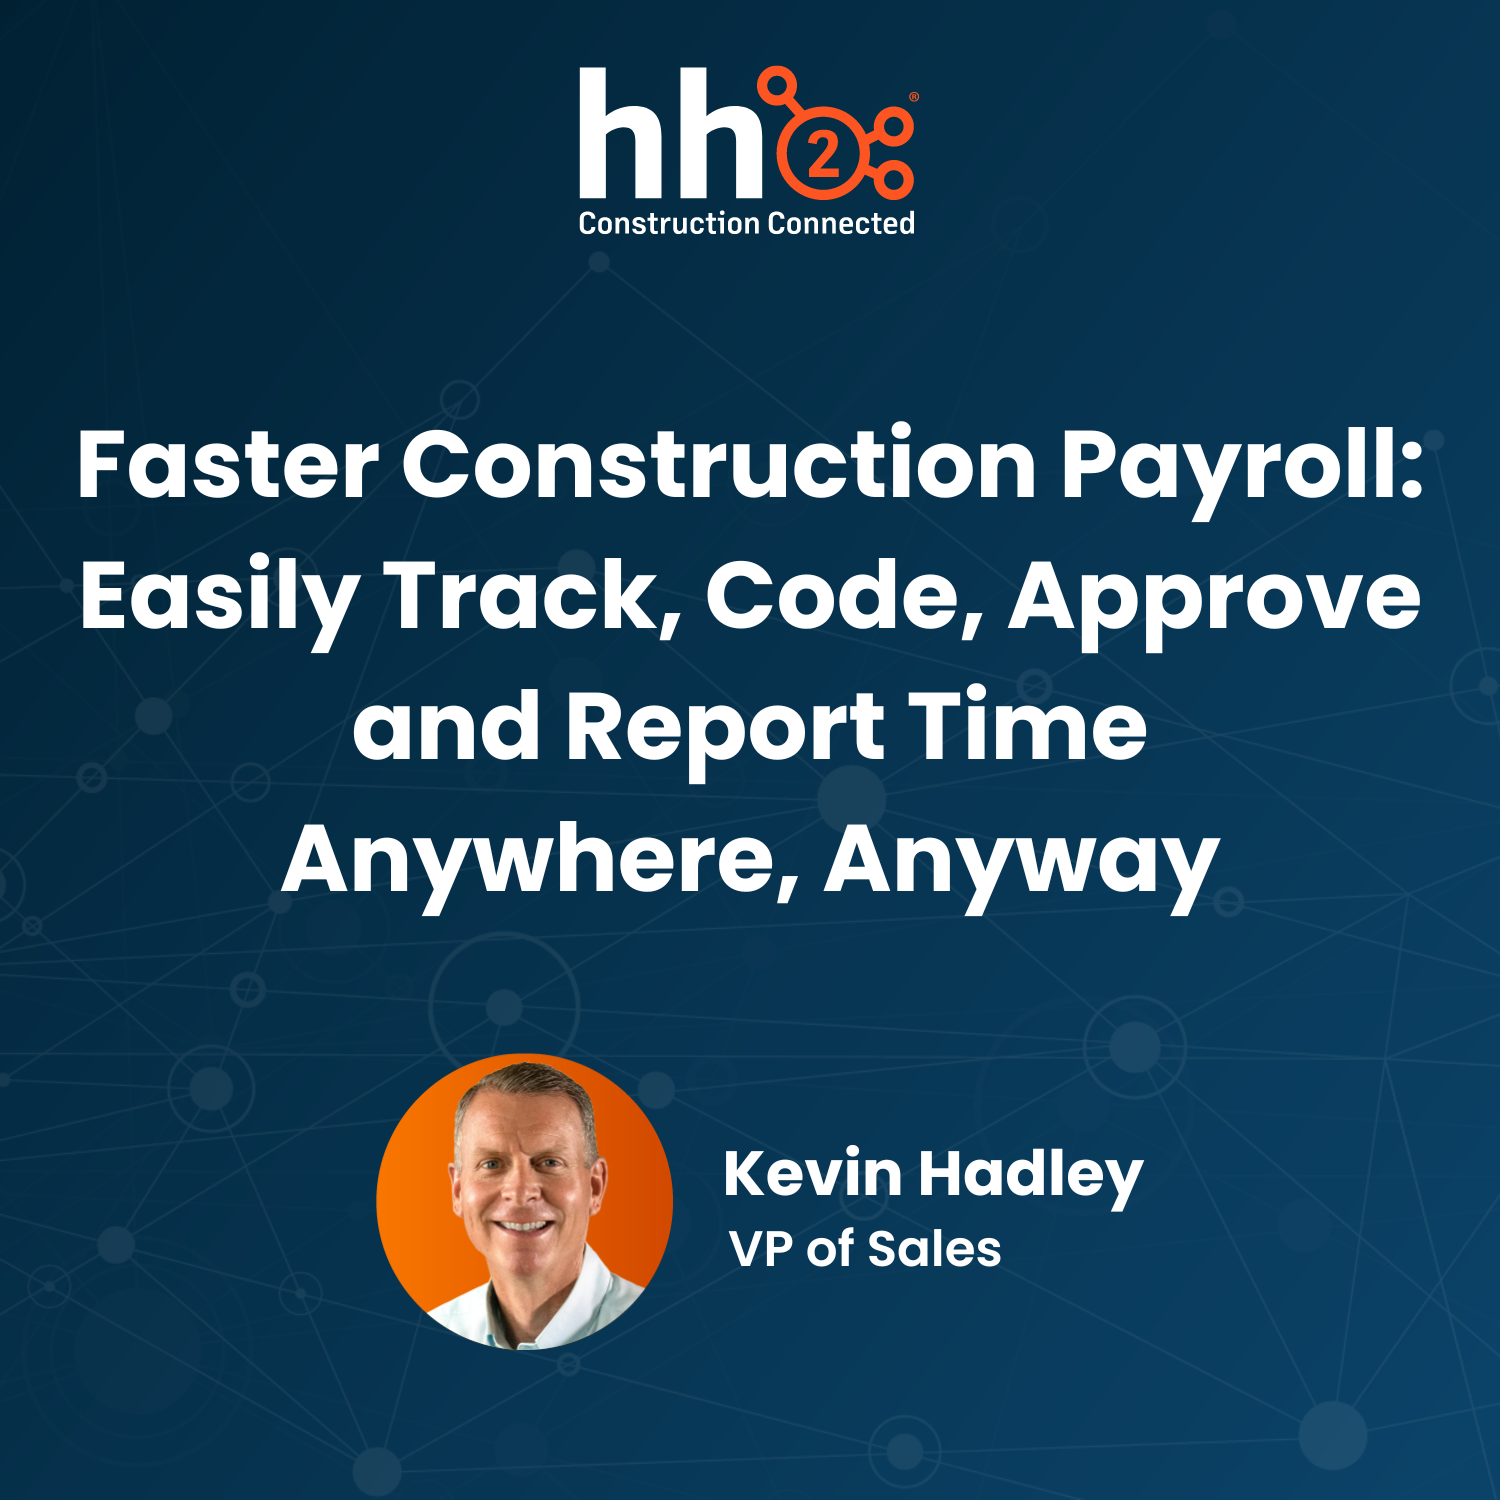 Faster Construction Payroll: Easily Track, Code, Approve and Report Time Anywhere, Anyway